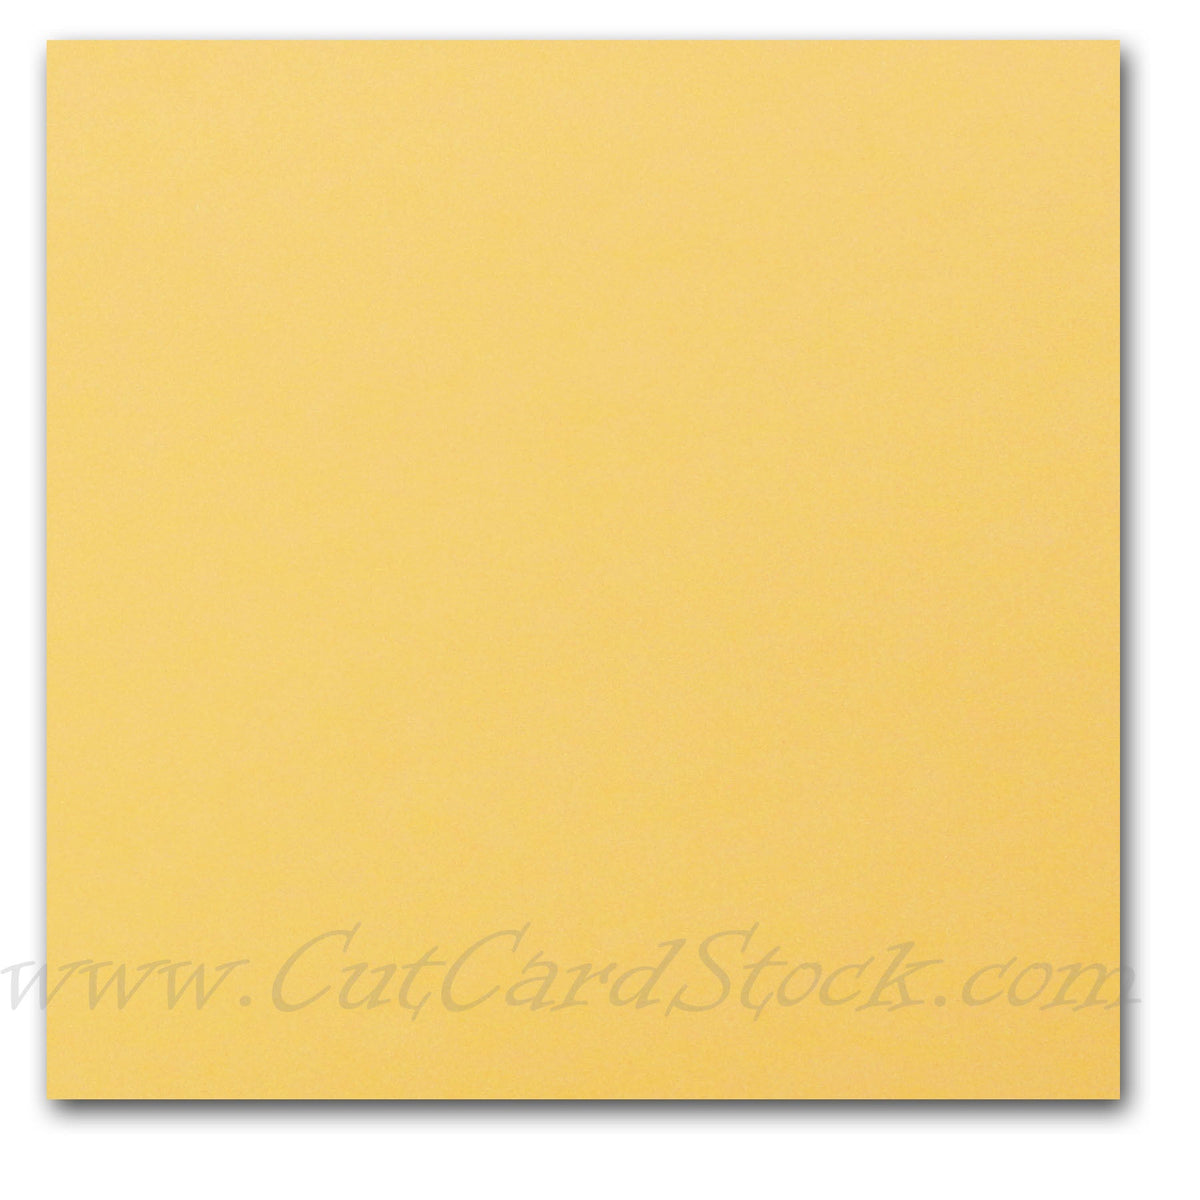 Goldenrod discount paper